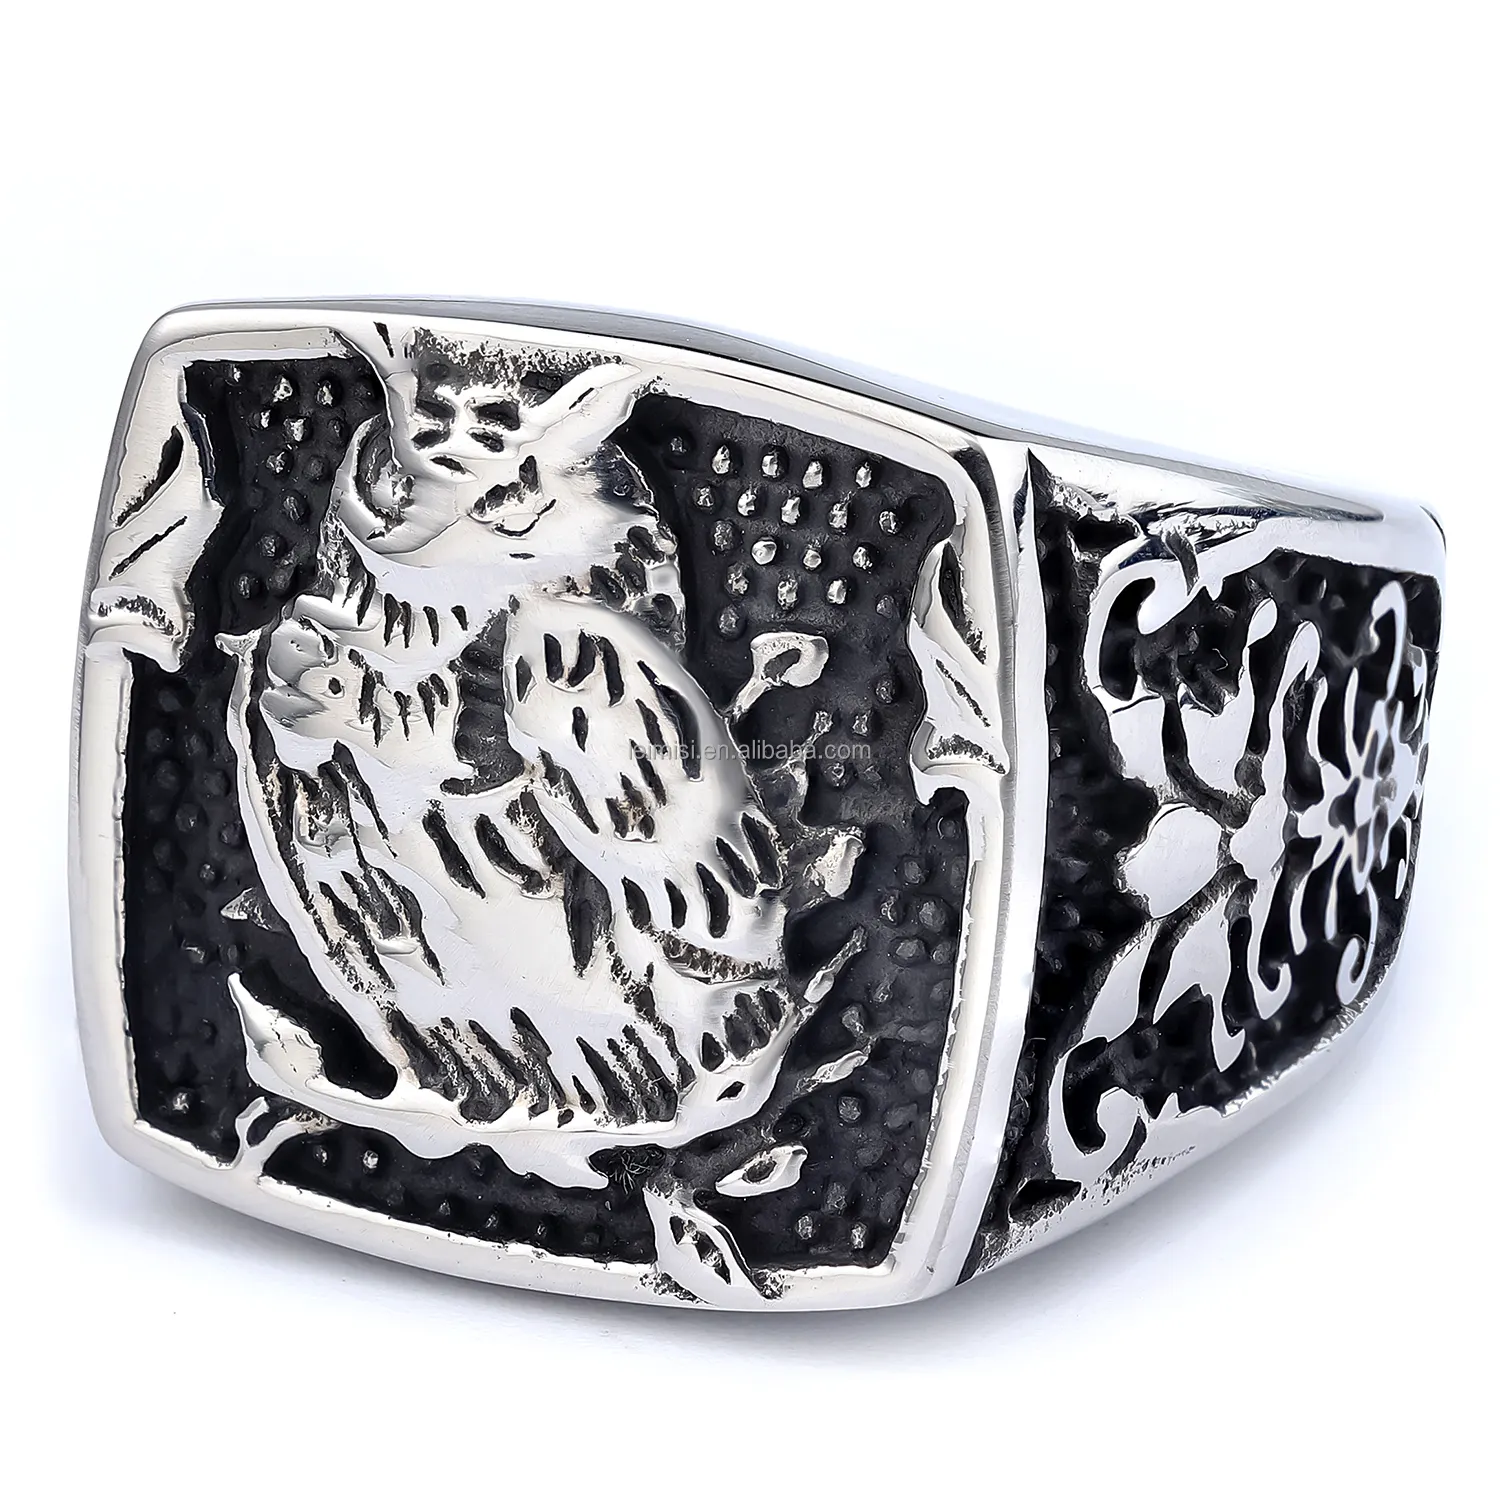 Unisex Personalized Protection Large Statement Old Wise Bird Night Owl Animal Band Ring For Men Women